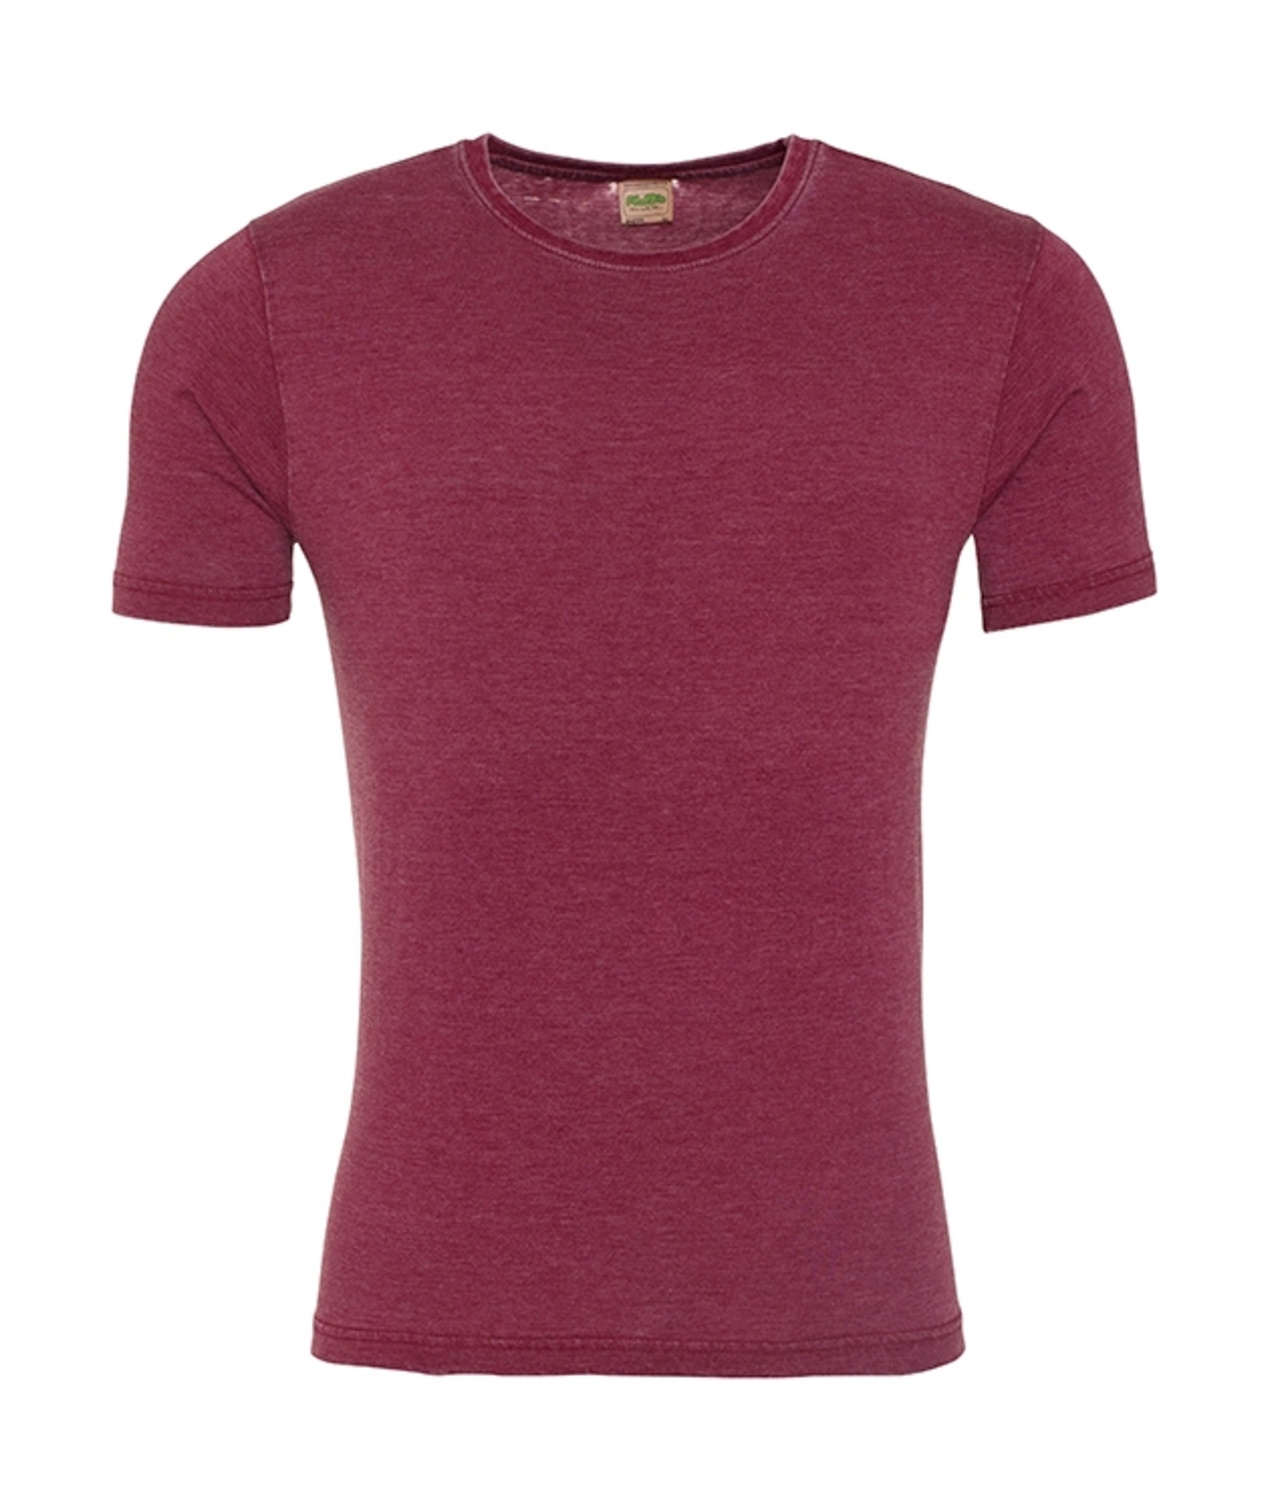 Just Ts Washed T - Burgundy - L